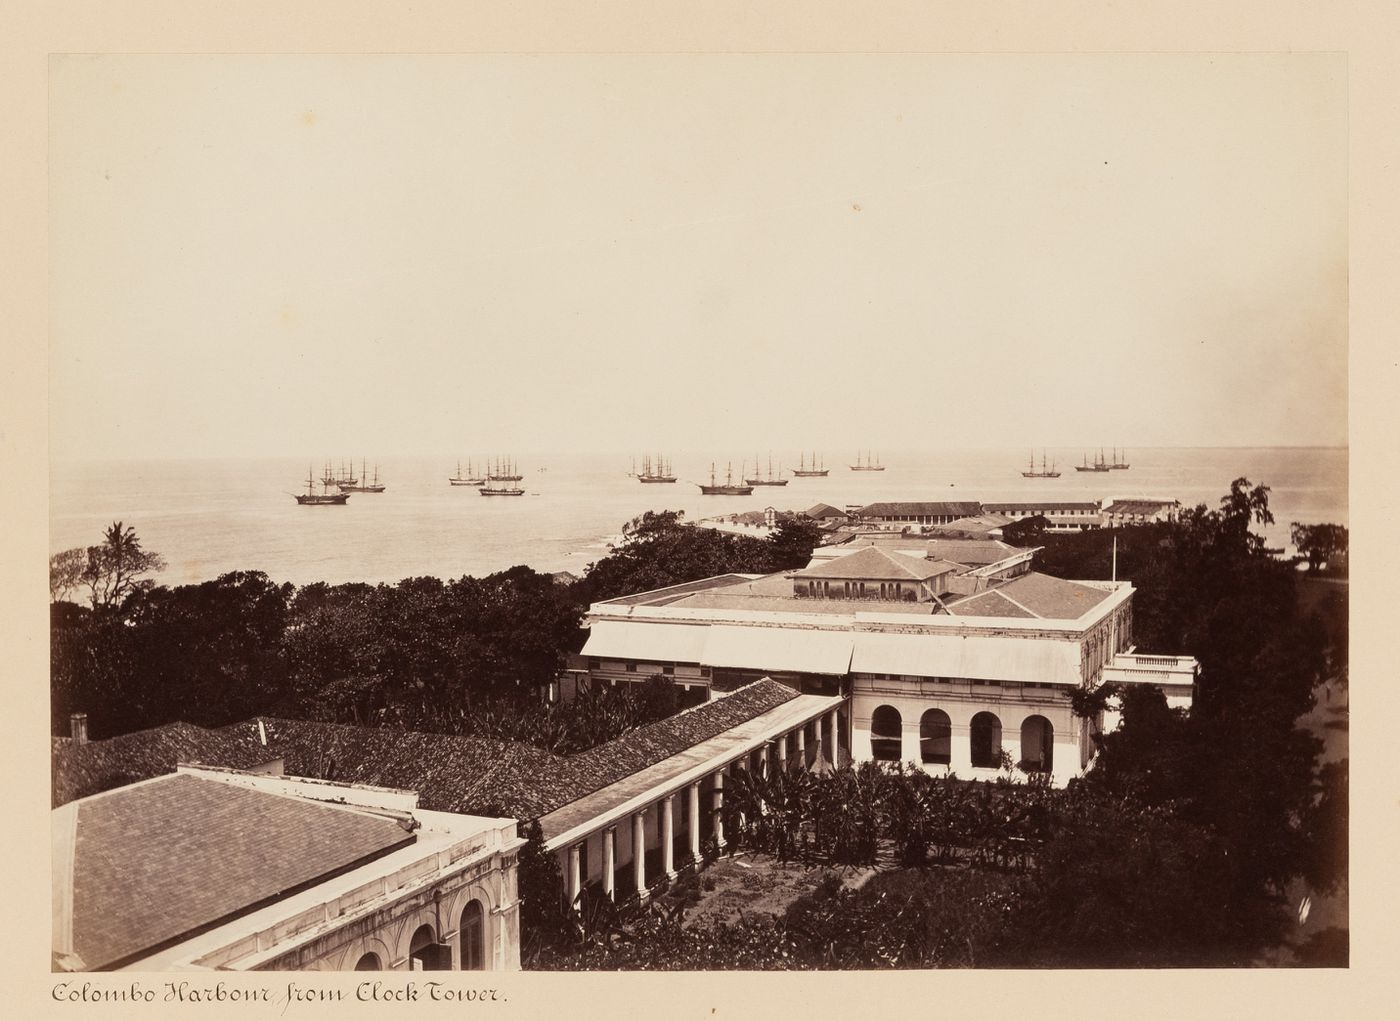 View of the harbour from the clock tower and lighthouse with the Queen's House in the foreground, Colombo, Ceylon (now Sri Lanka)